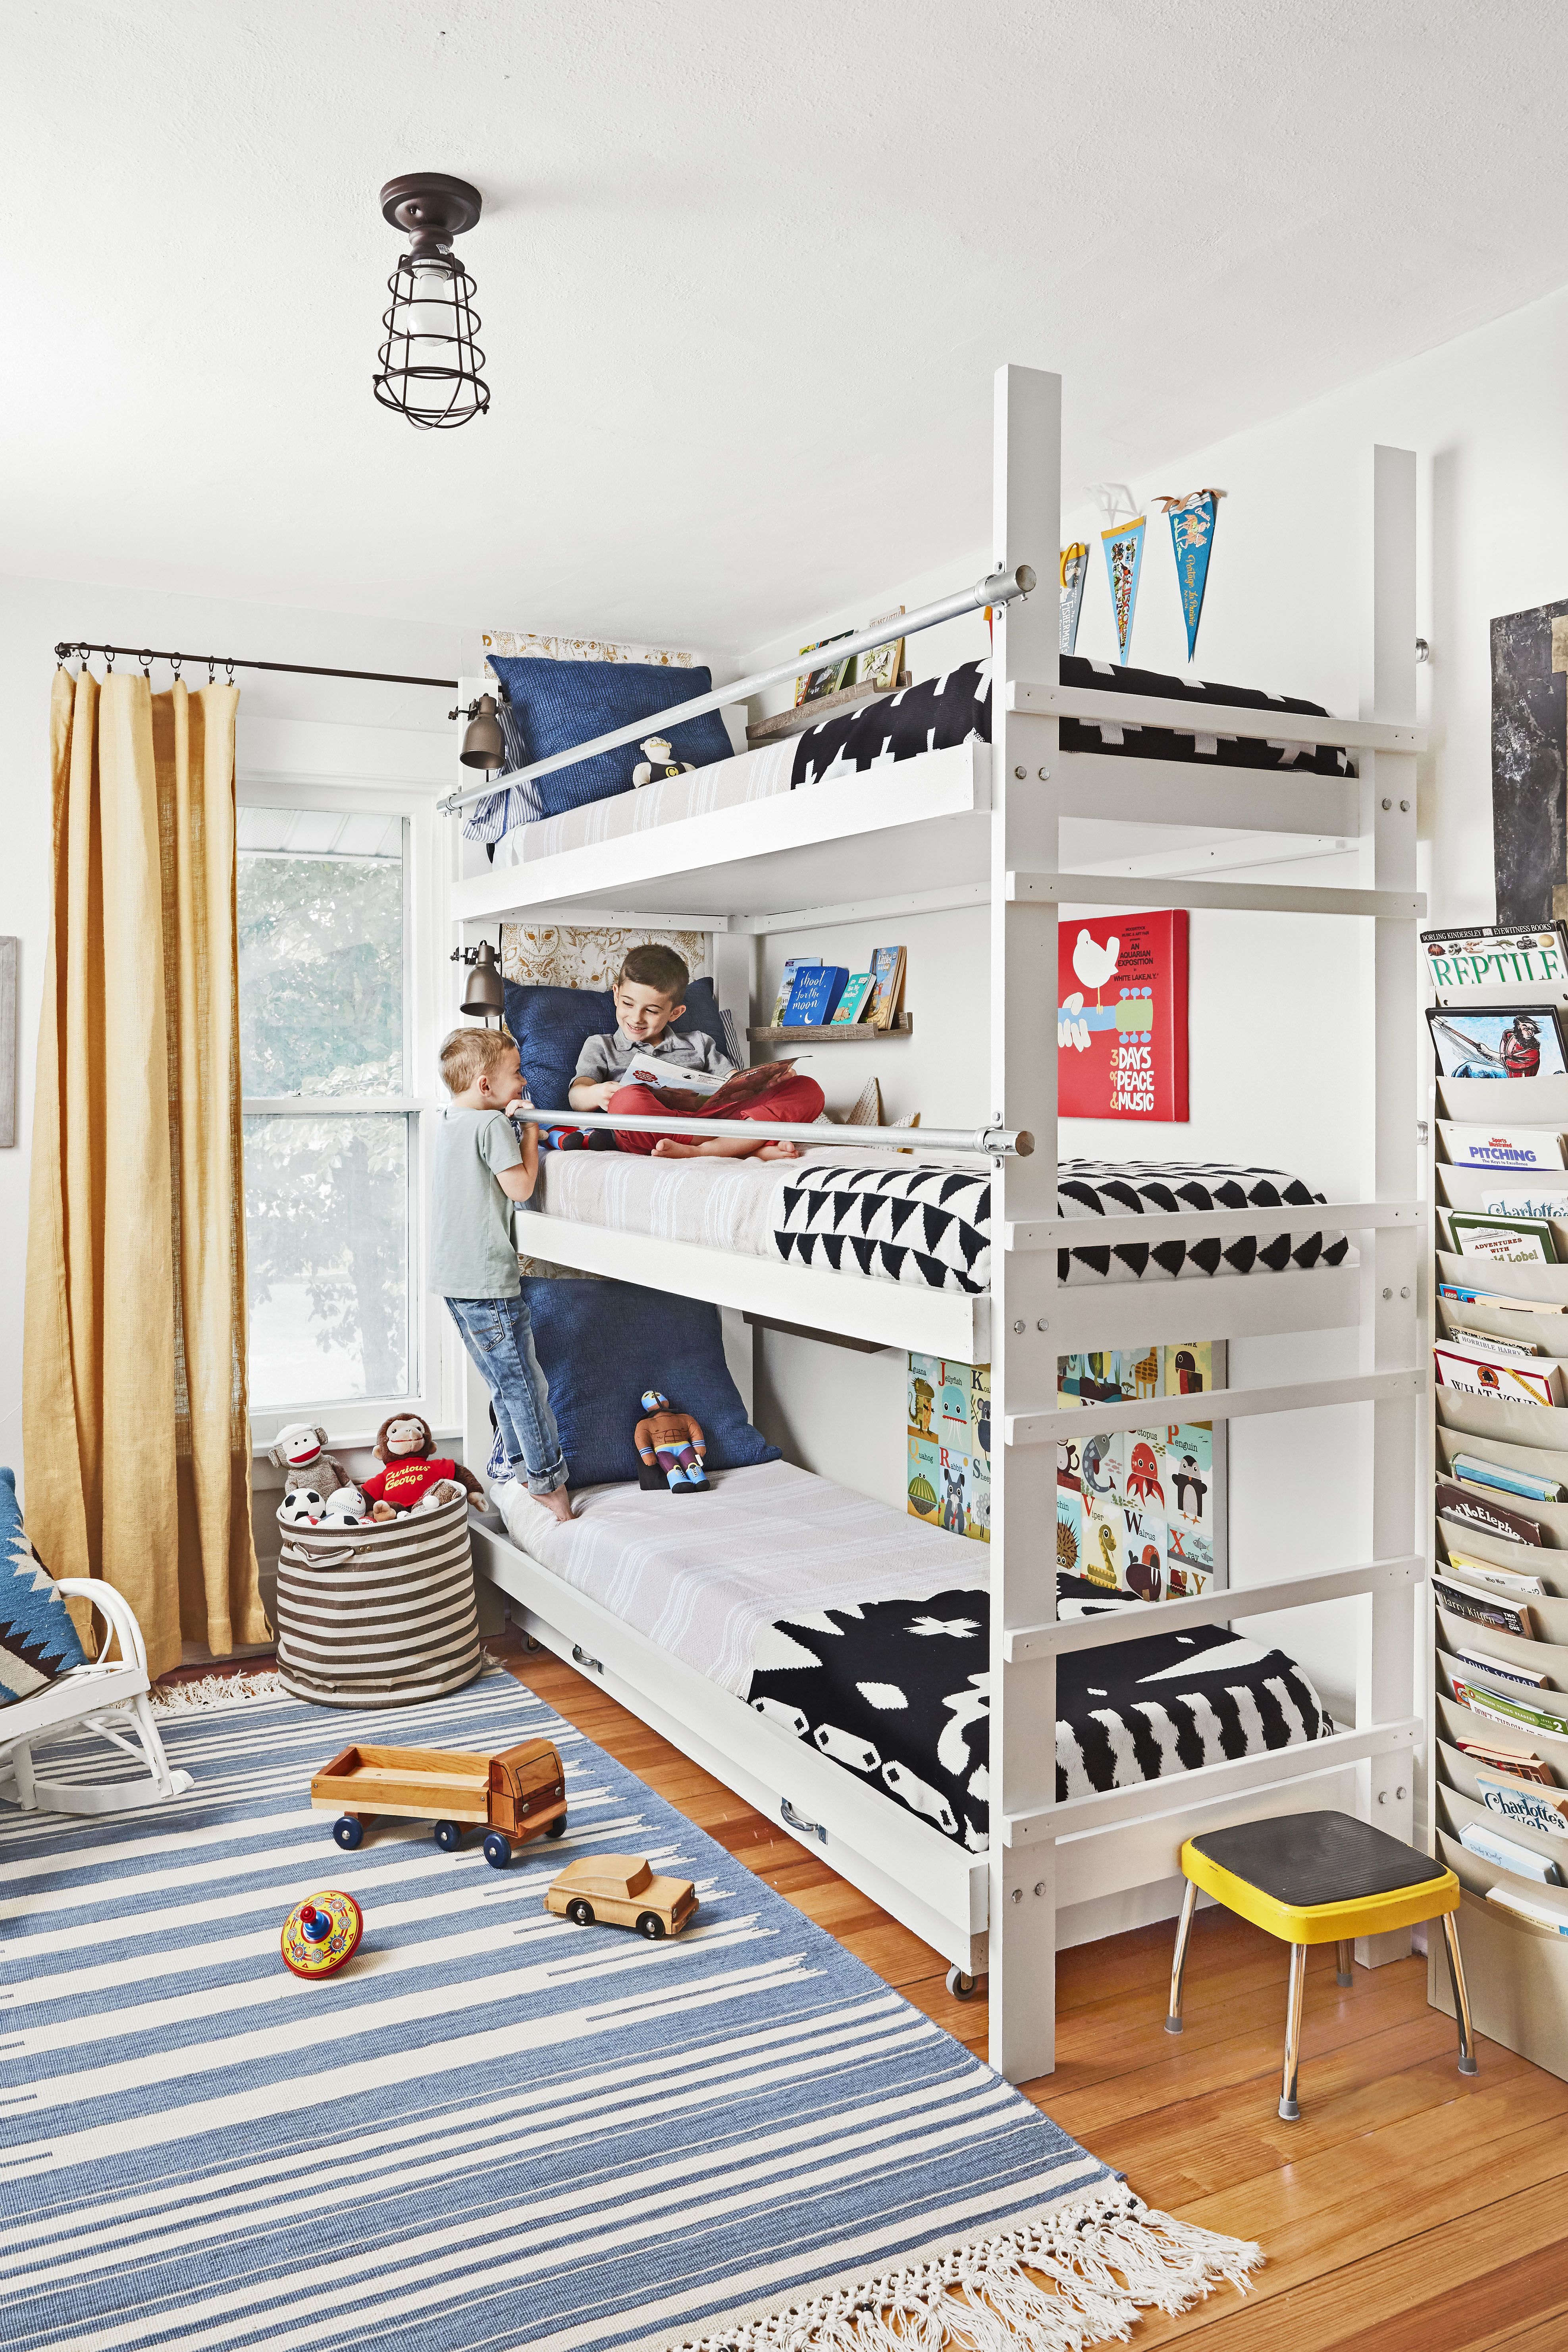 30 Best Kids Room Ideas Diy Boys And, Top Bunk Bed Decorating Ideas